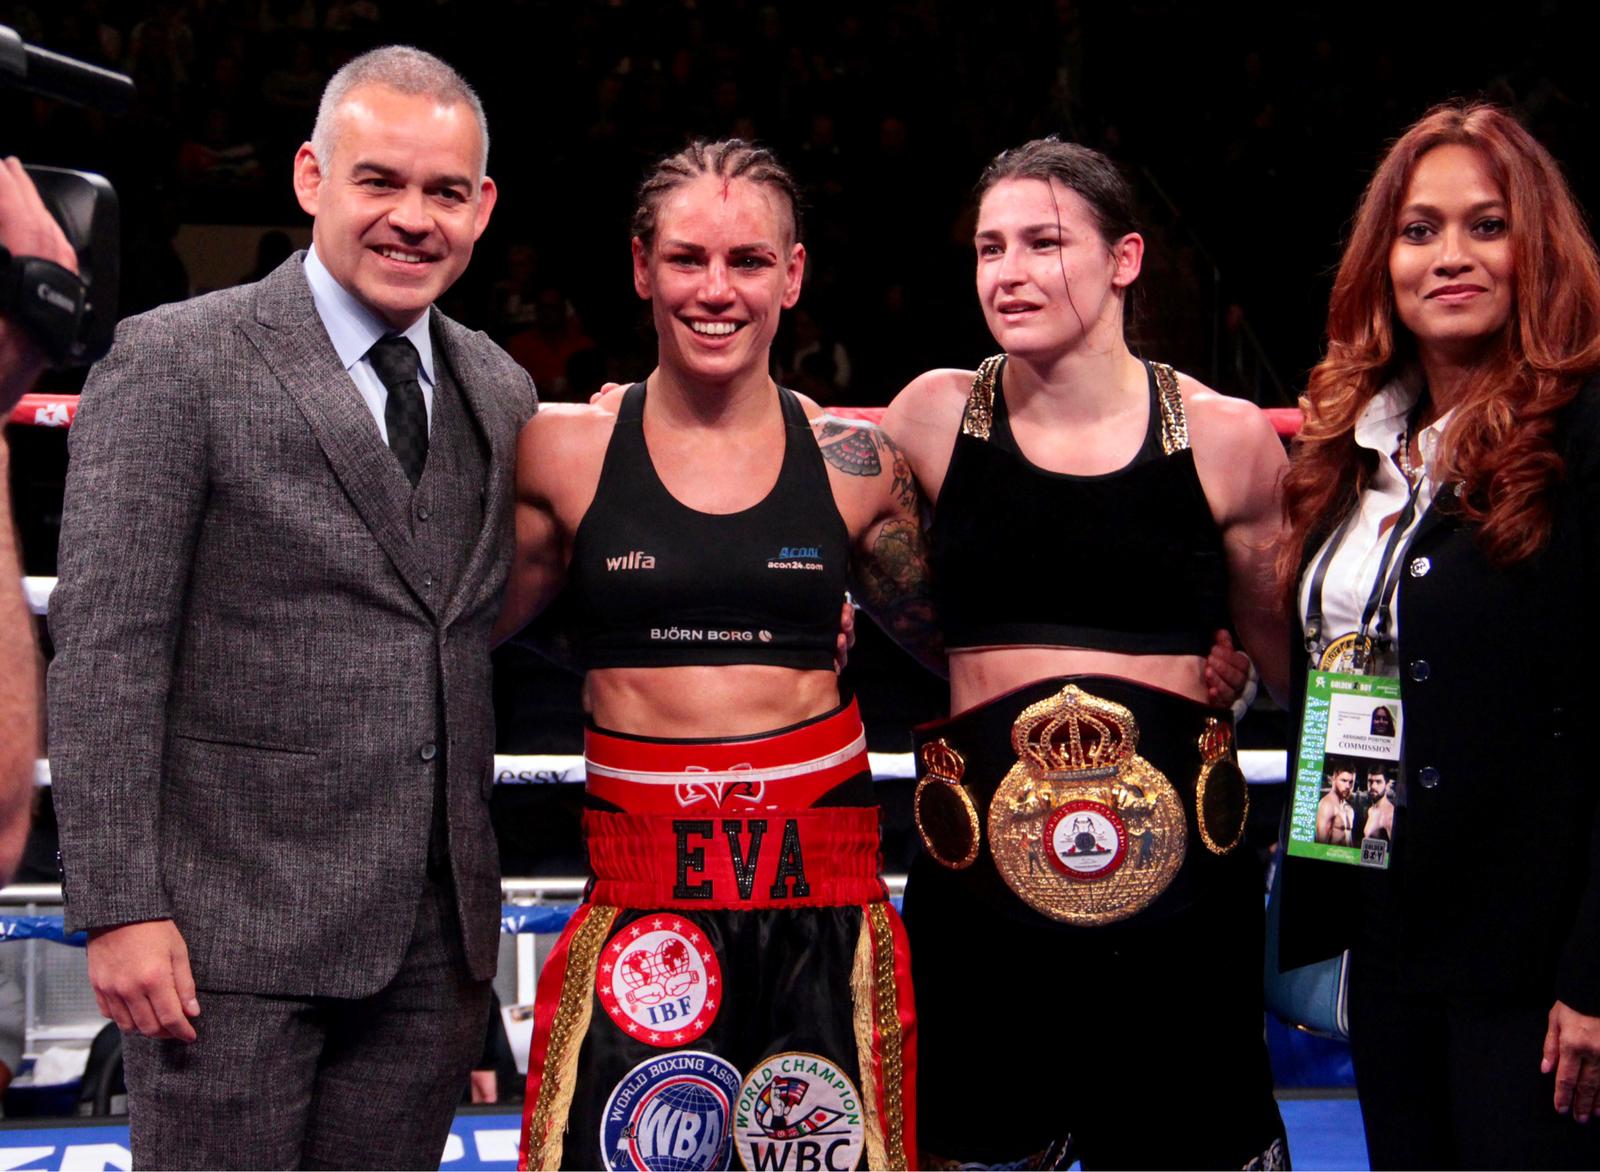 Brilliant defense by Katie Taylor at MSG